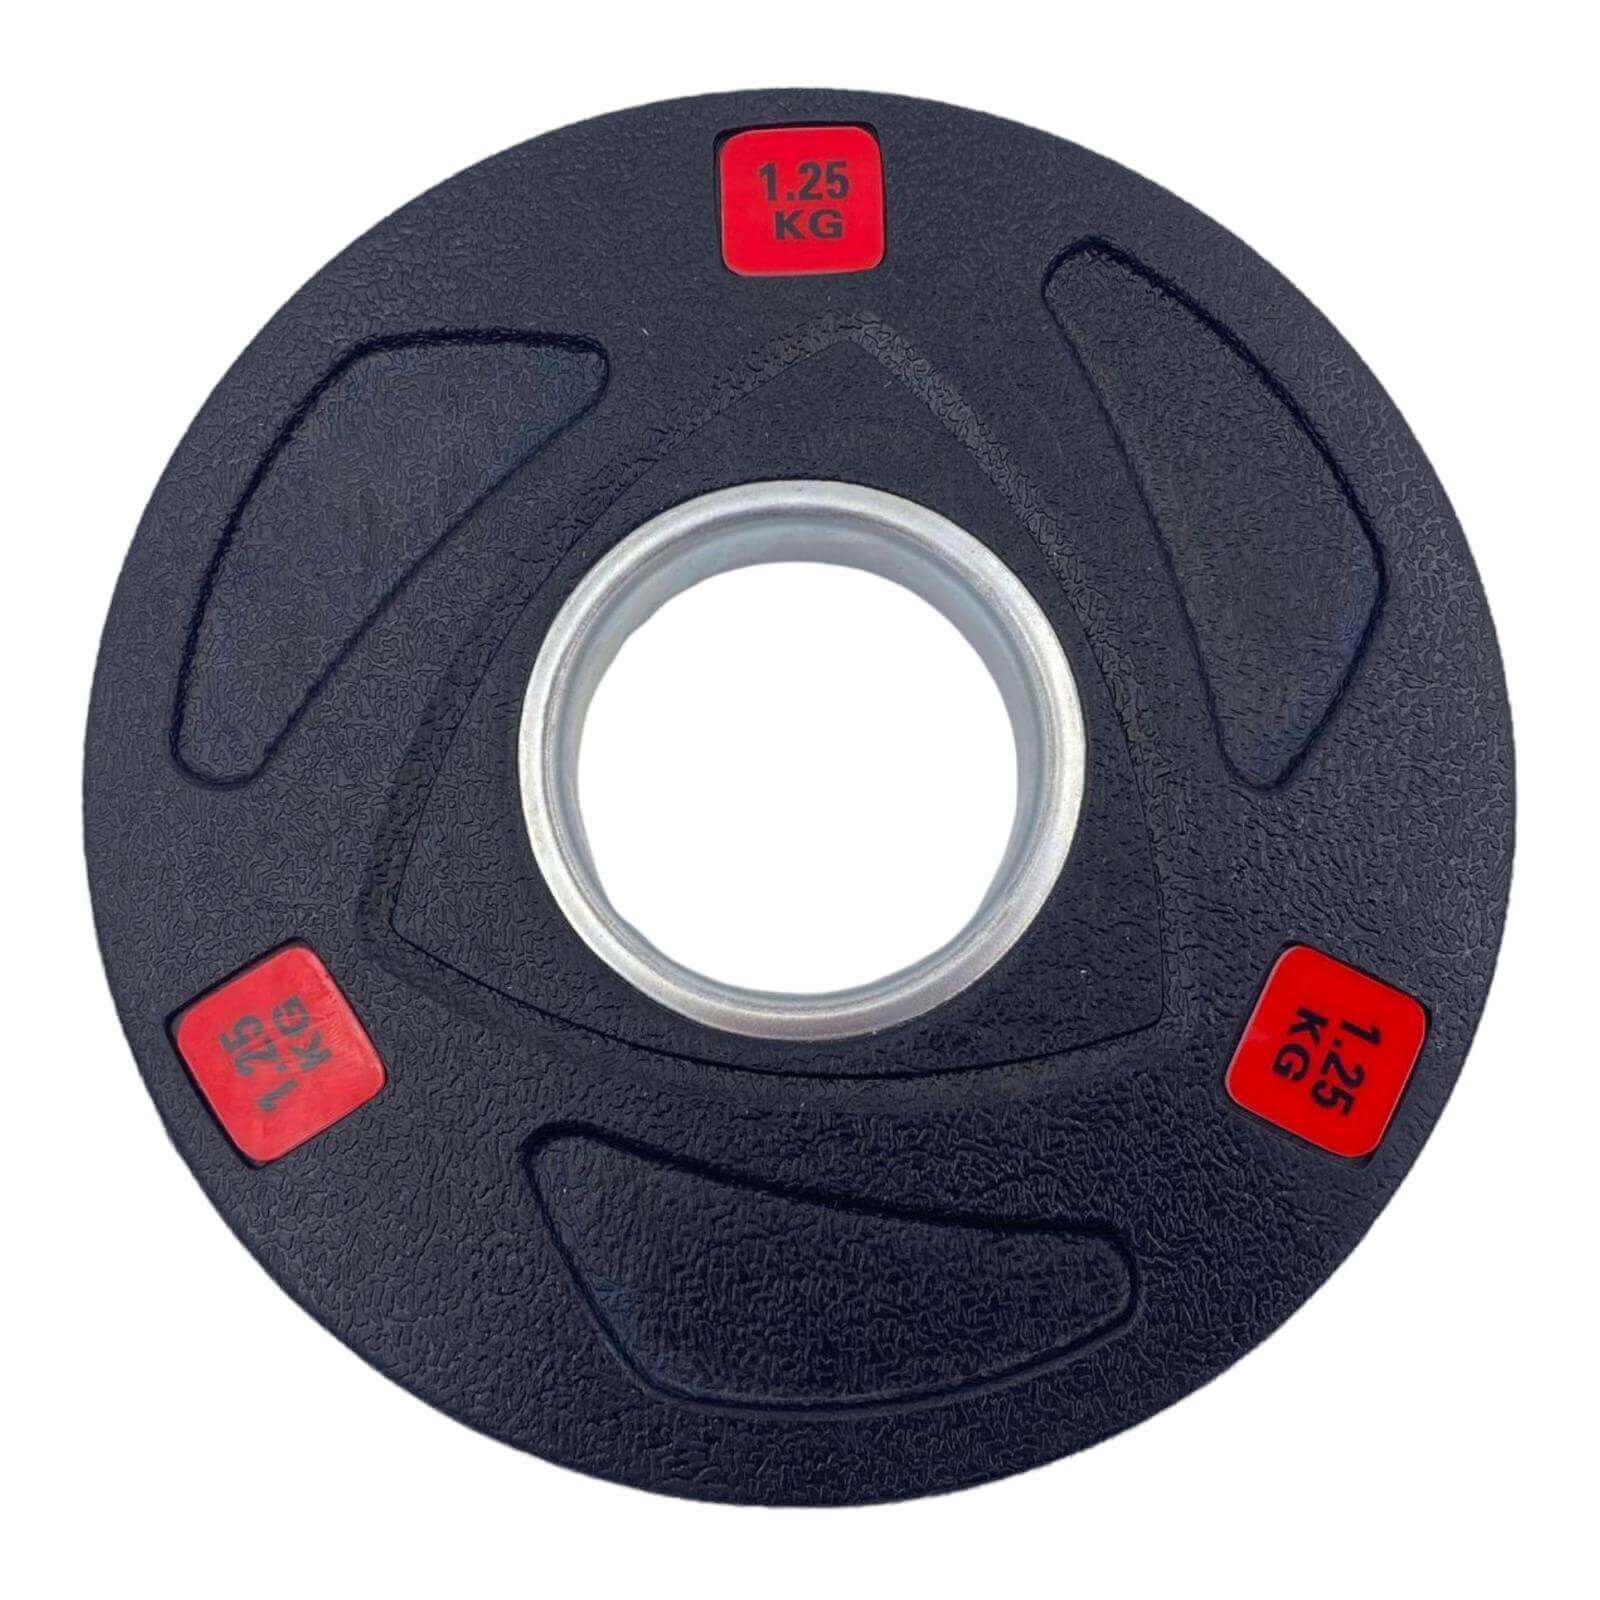 Rubber Coated Tri-grip Weight Plates Type-A (Pairs) - 1.25kg | Tri Grip Rubber Plates | INSOURCE